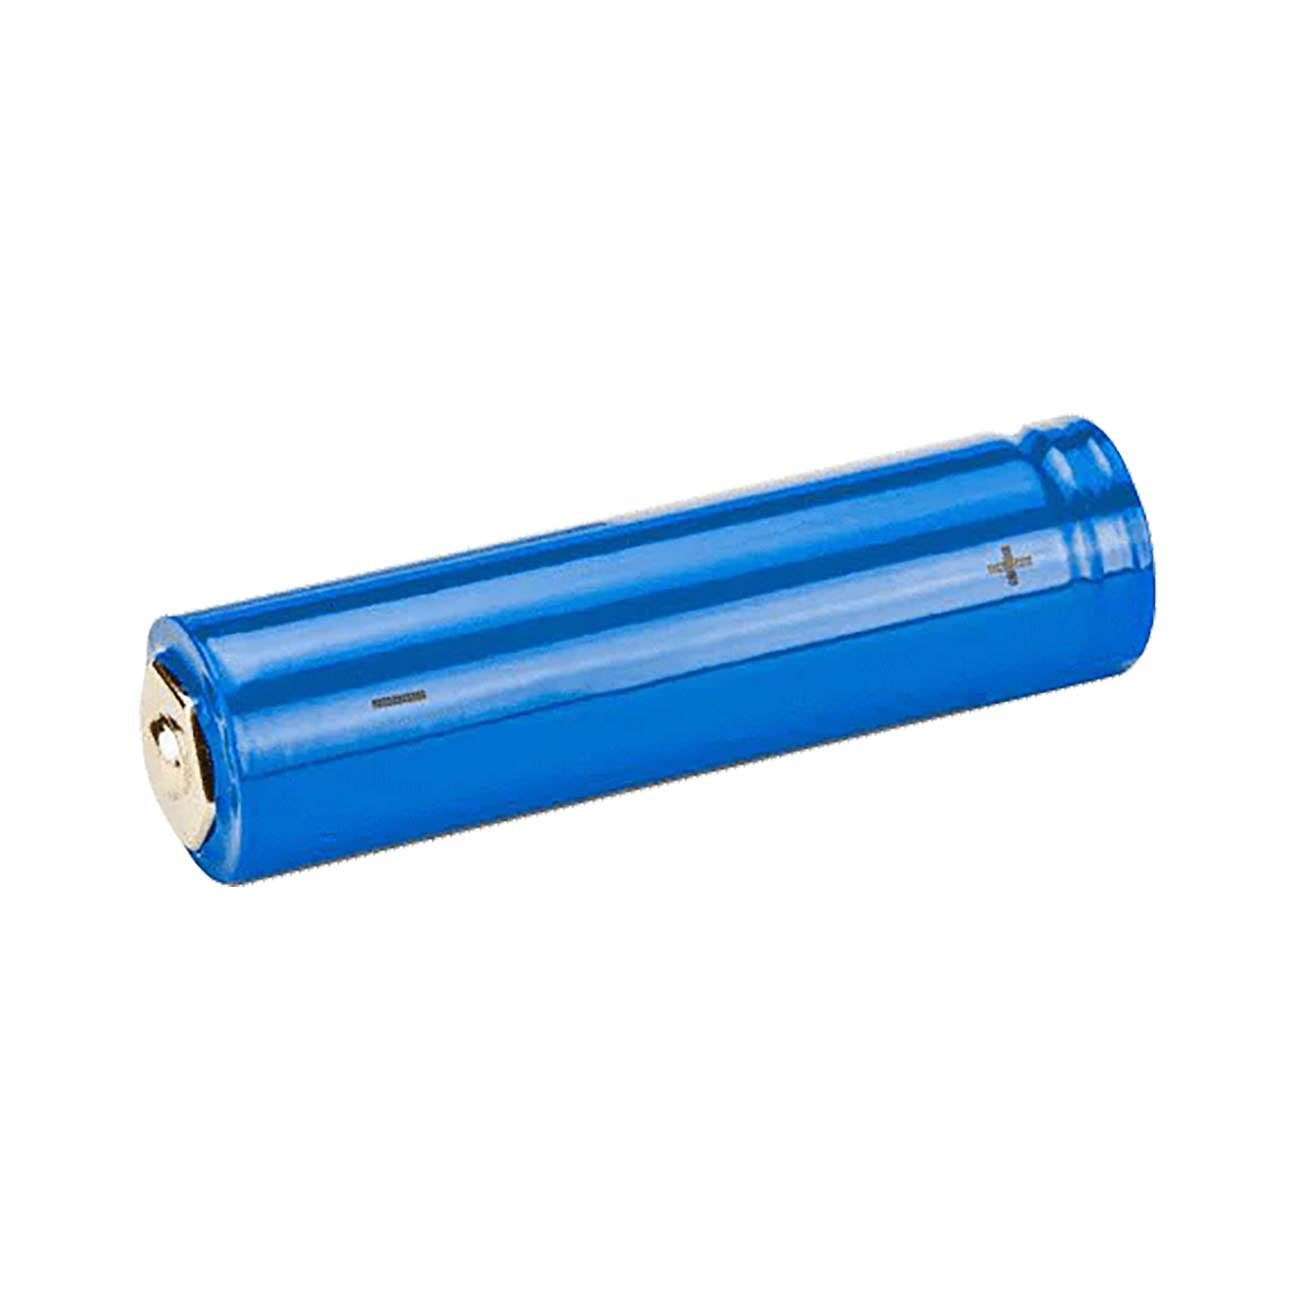 Maglite Replacement Mag-tac Rechargeable Lifepo4 Battery